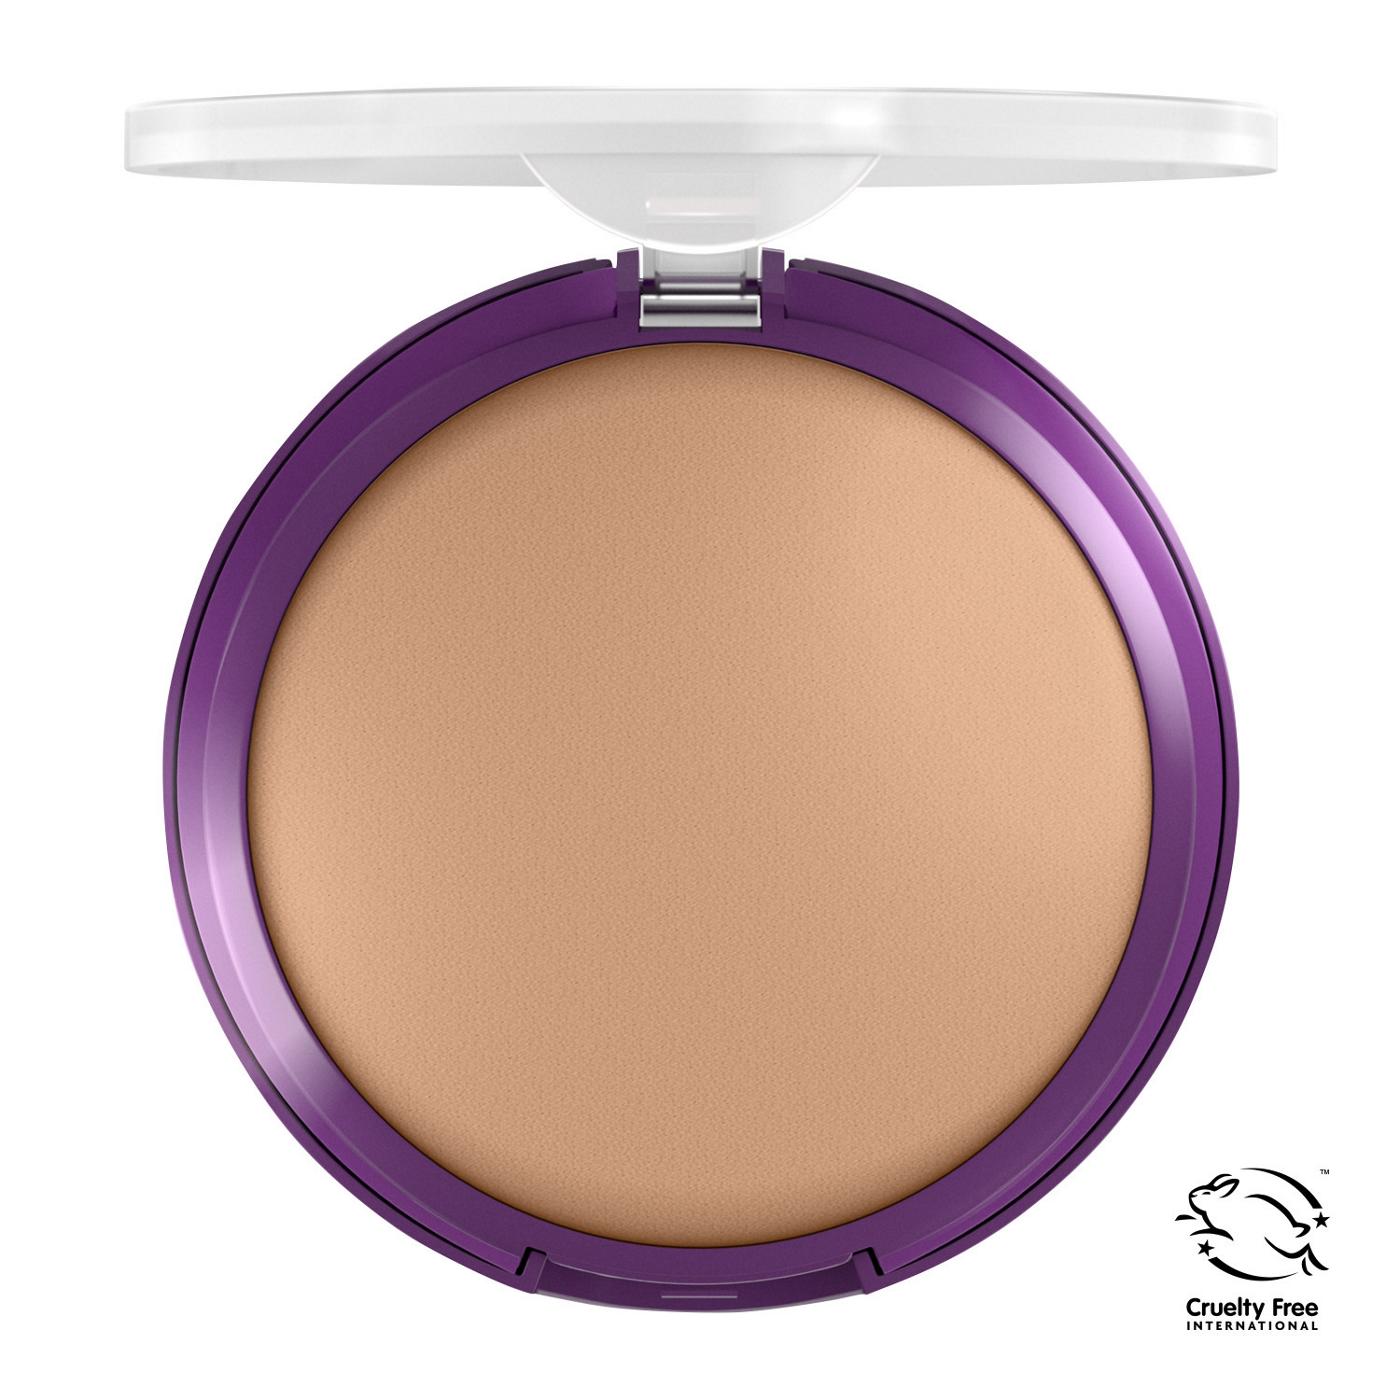 Covergirl Simply Ageless Pressed Powder 225 Buff Beige; image 10 of 13